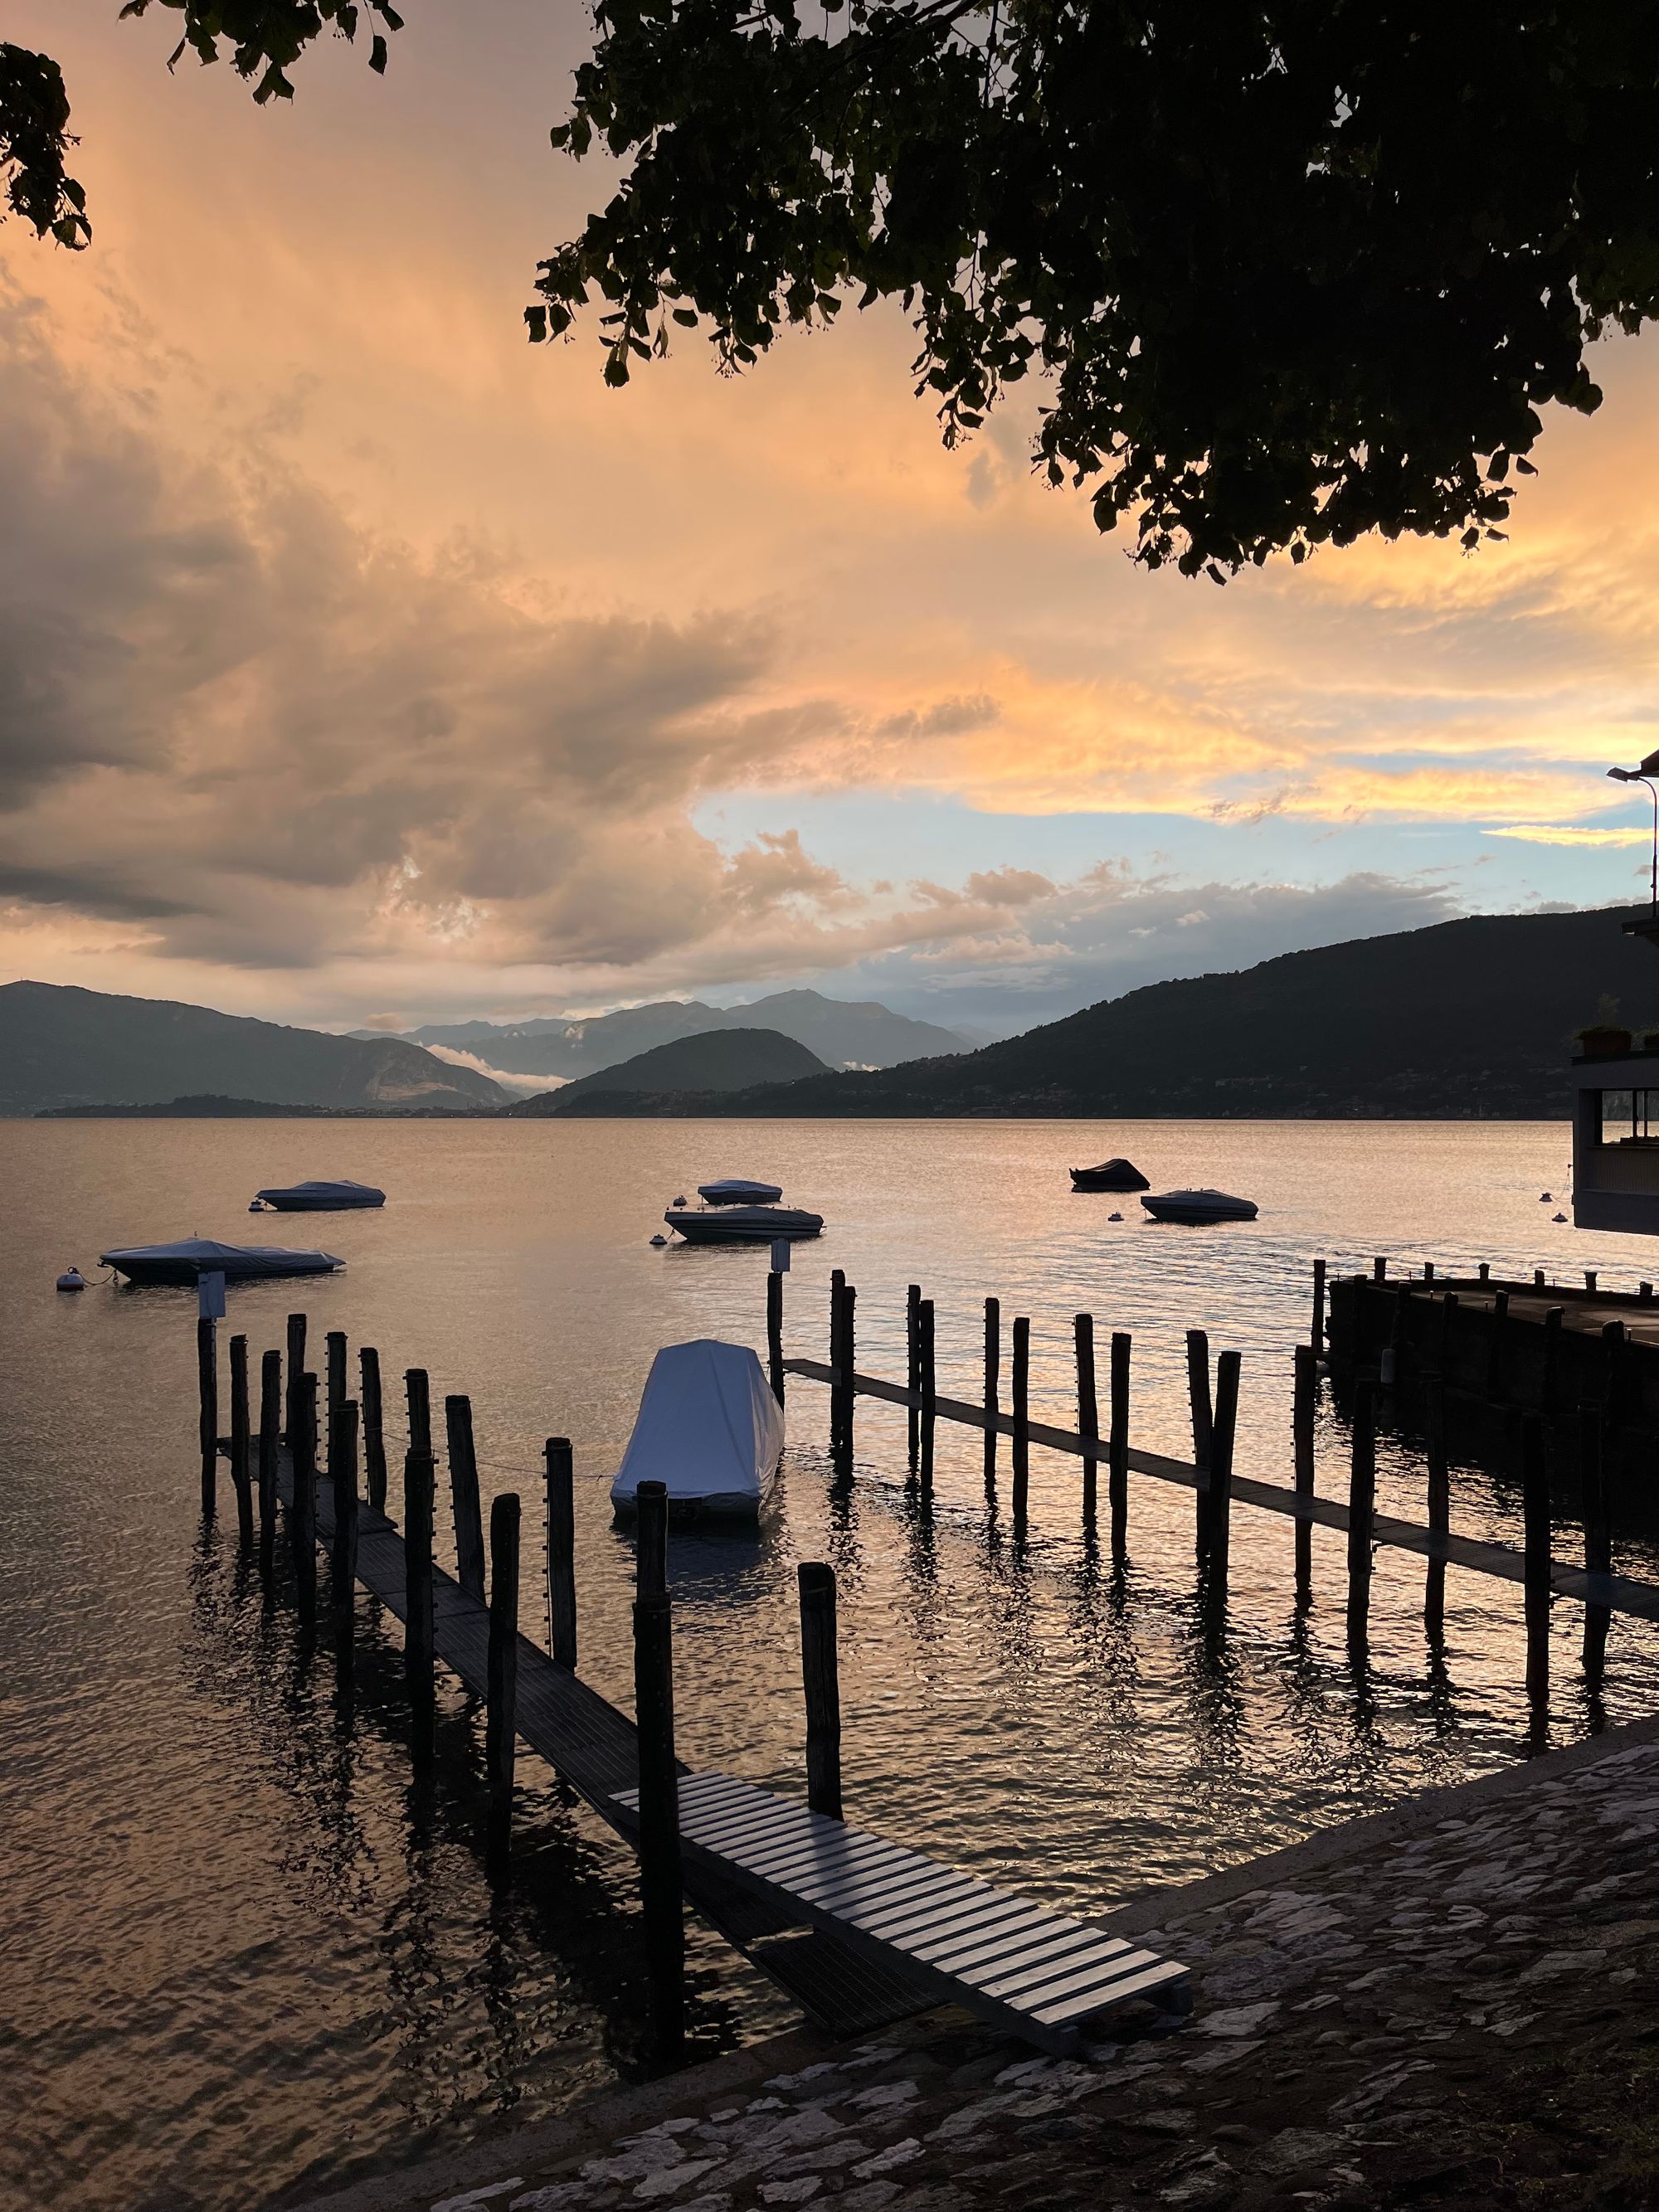 A picture of a lake taken from the shore. The sky is full of clouds colored orange from a recent storm. They reflect on the water, where a few boats sit anchored. Two wooden piers extend from the shore from right to left. In the distance mountains on the other side of the lake, and a small sliver of blue sky.